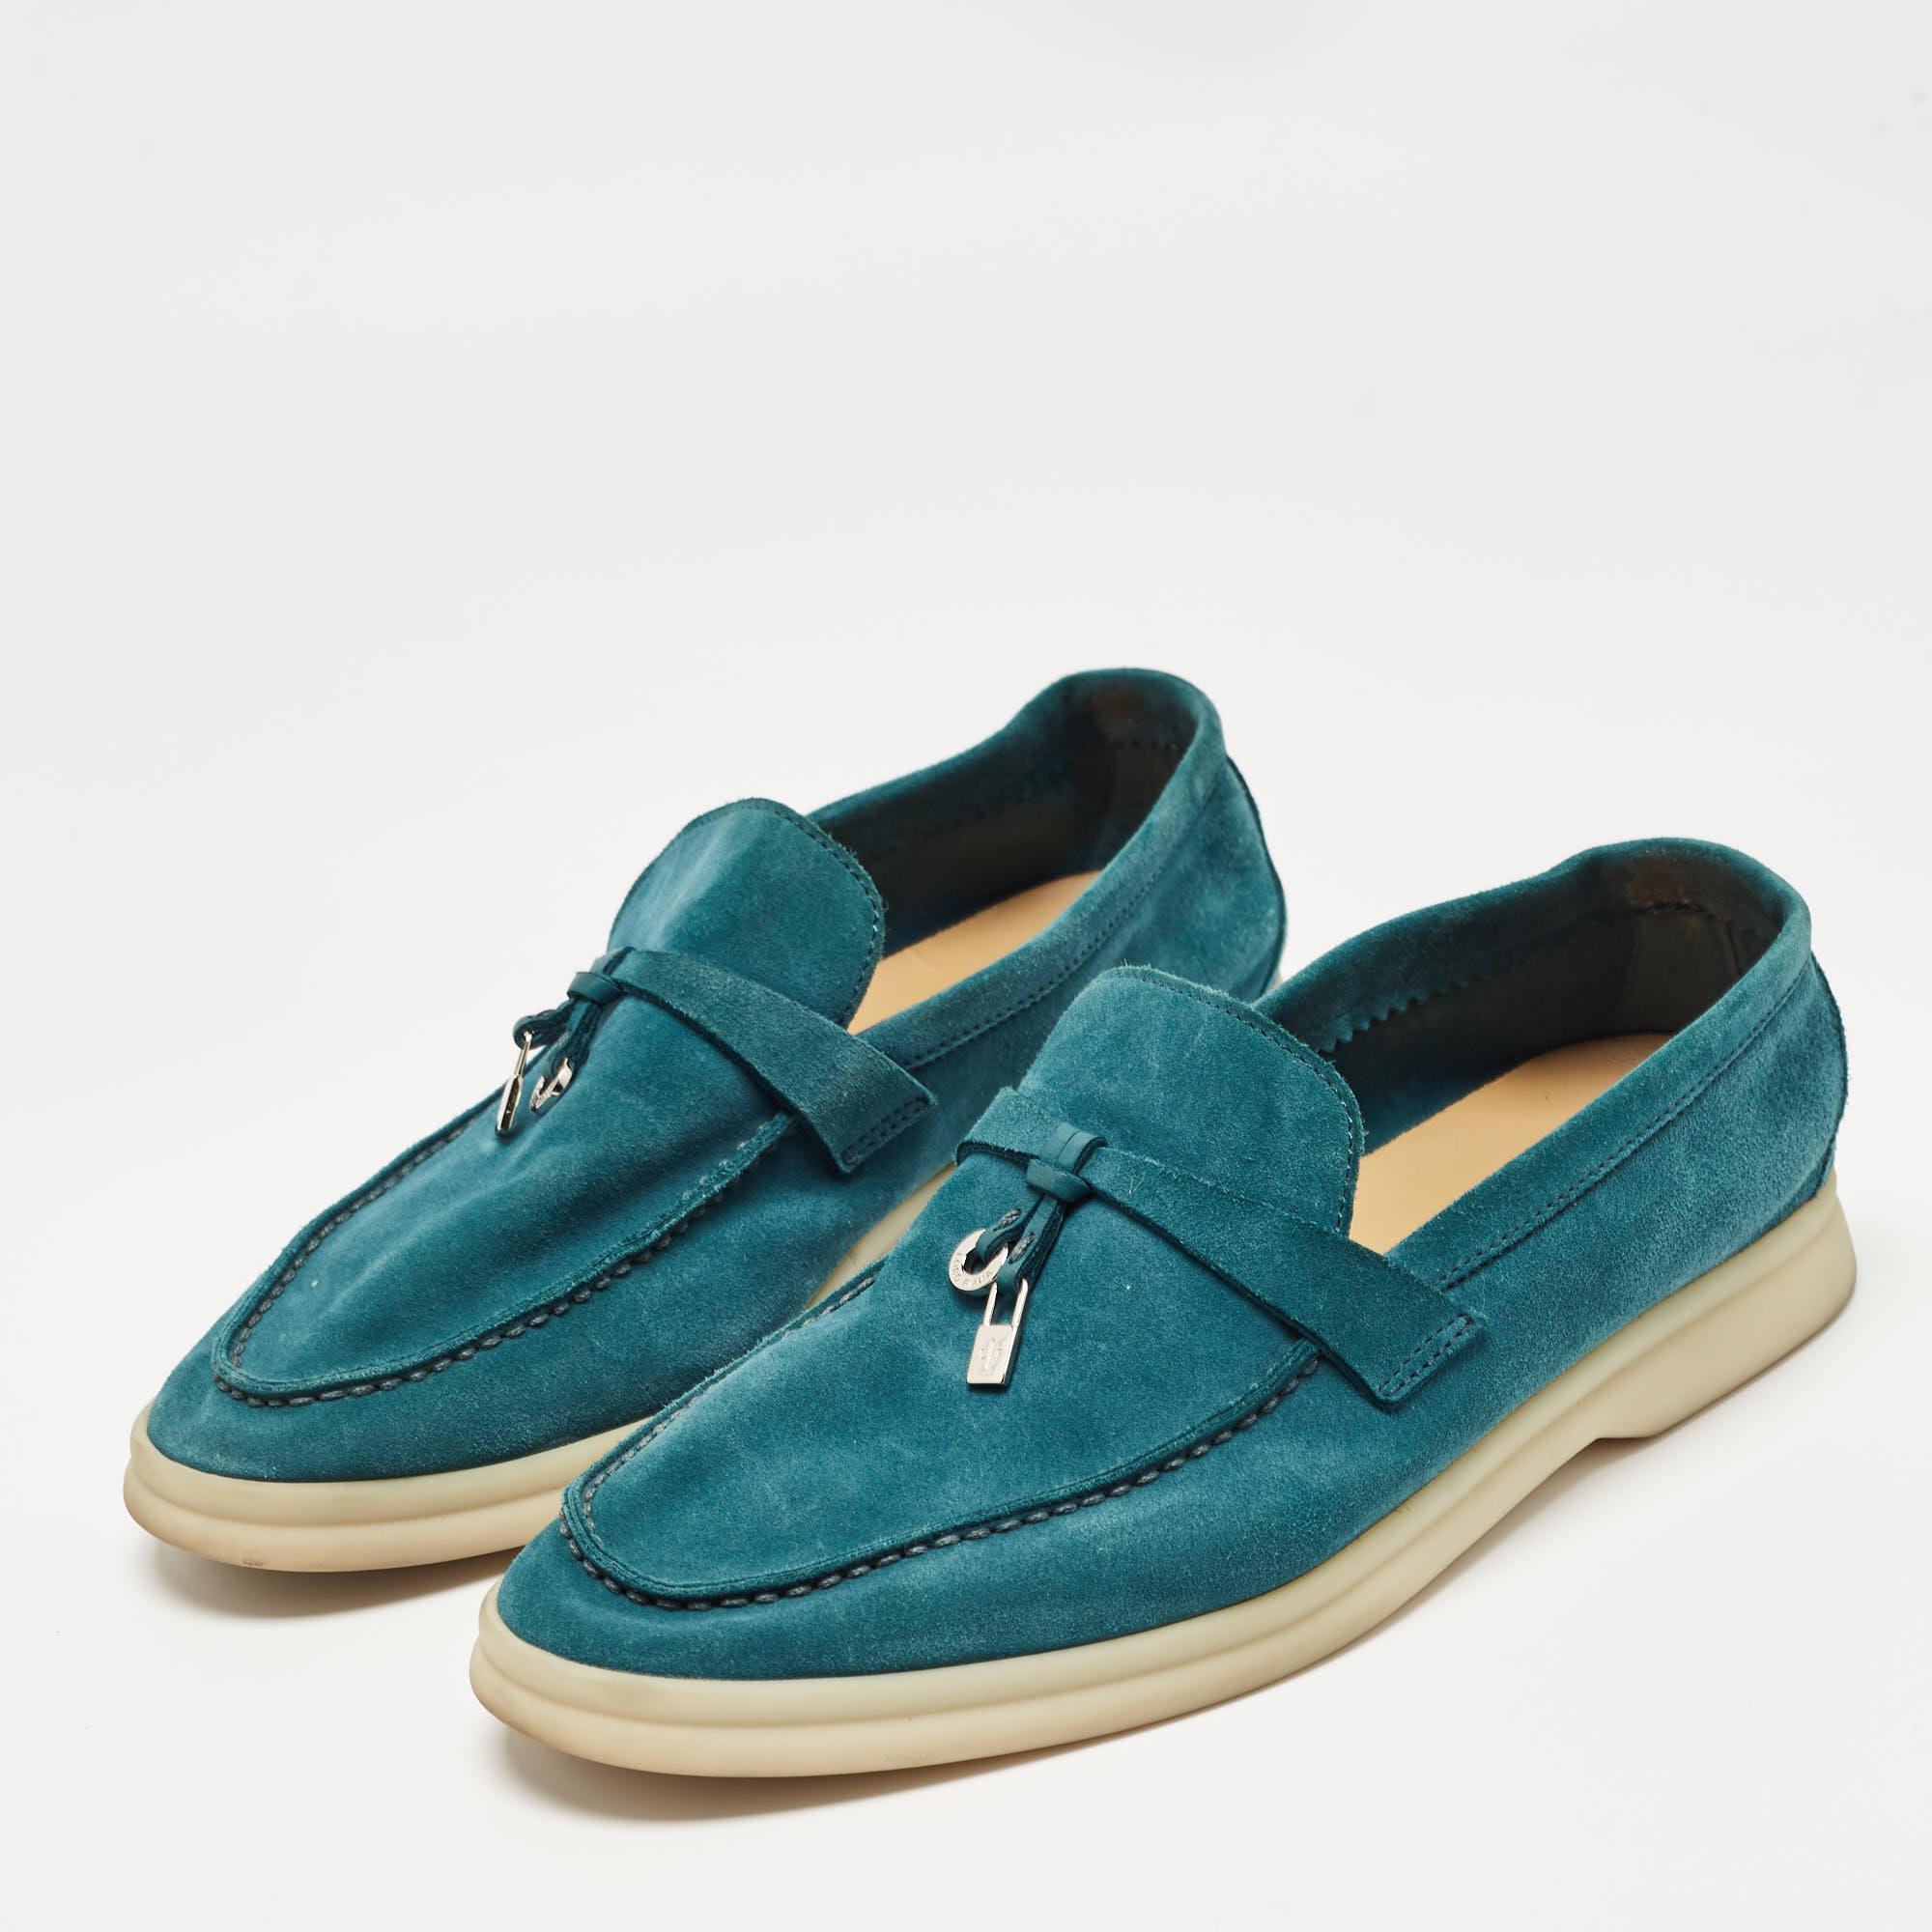 Loro Piana Teal Suede Summer Charms Walk Loafers Size 38 3